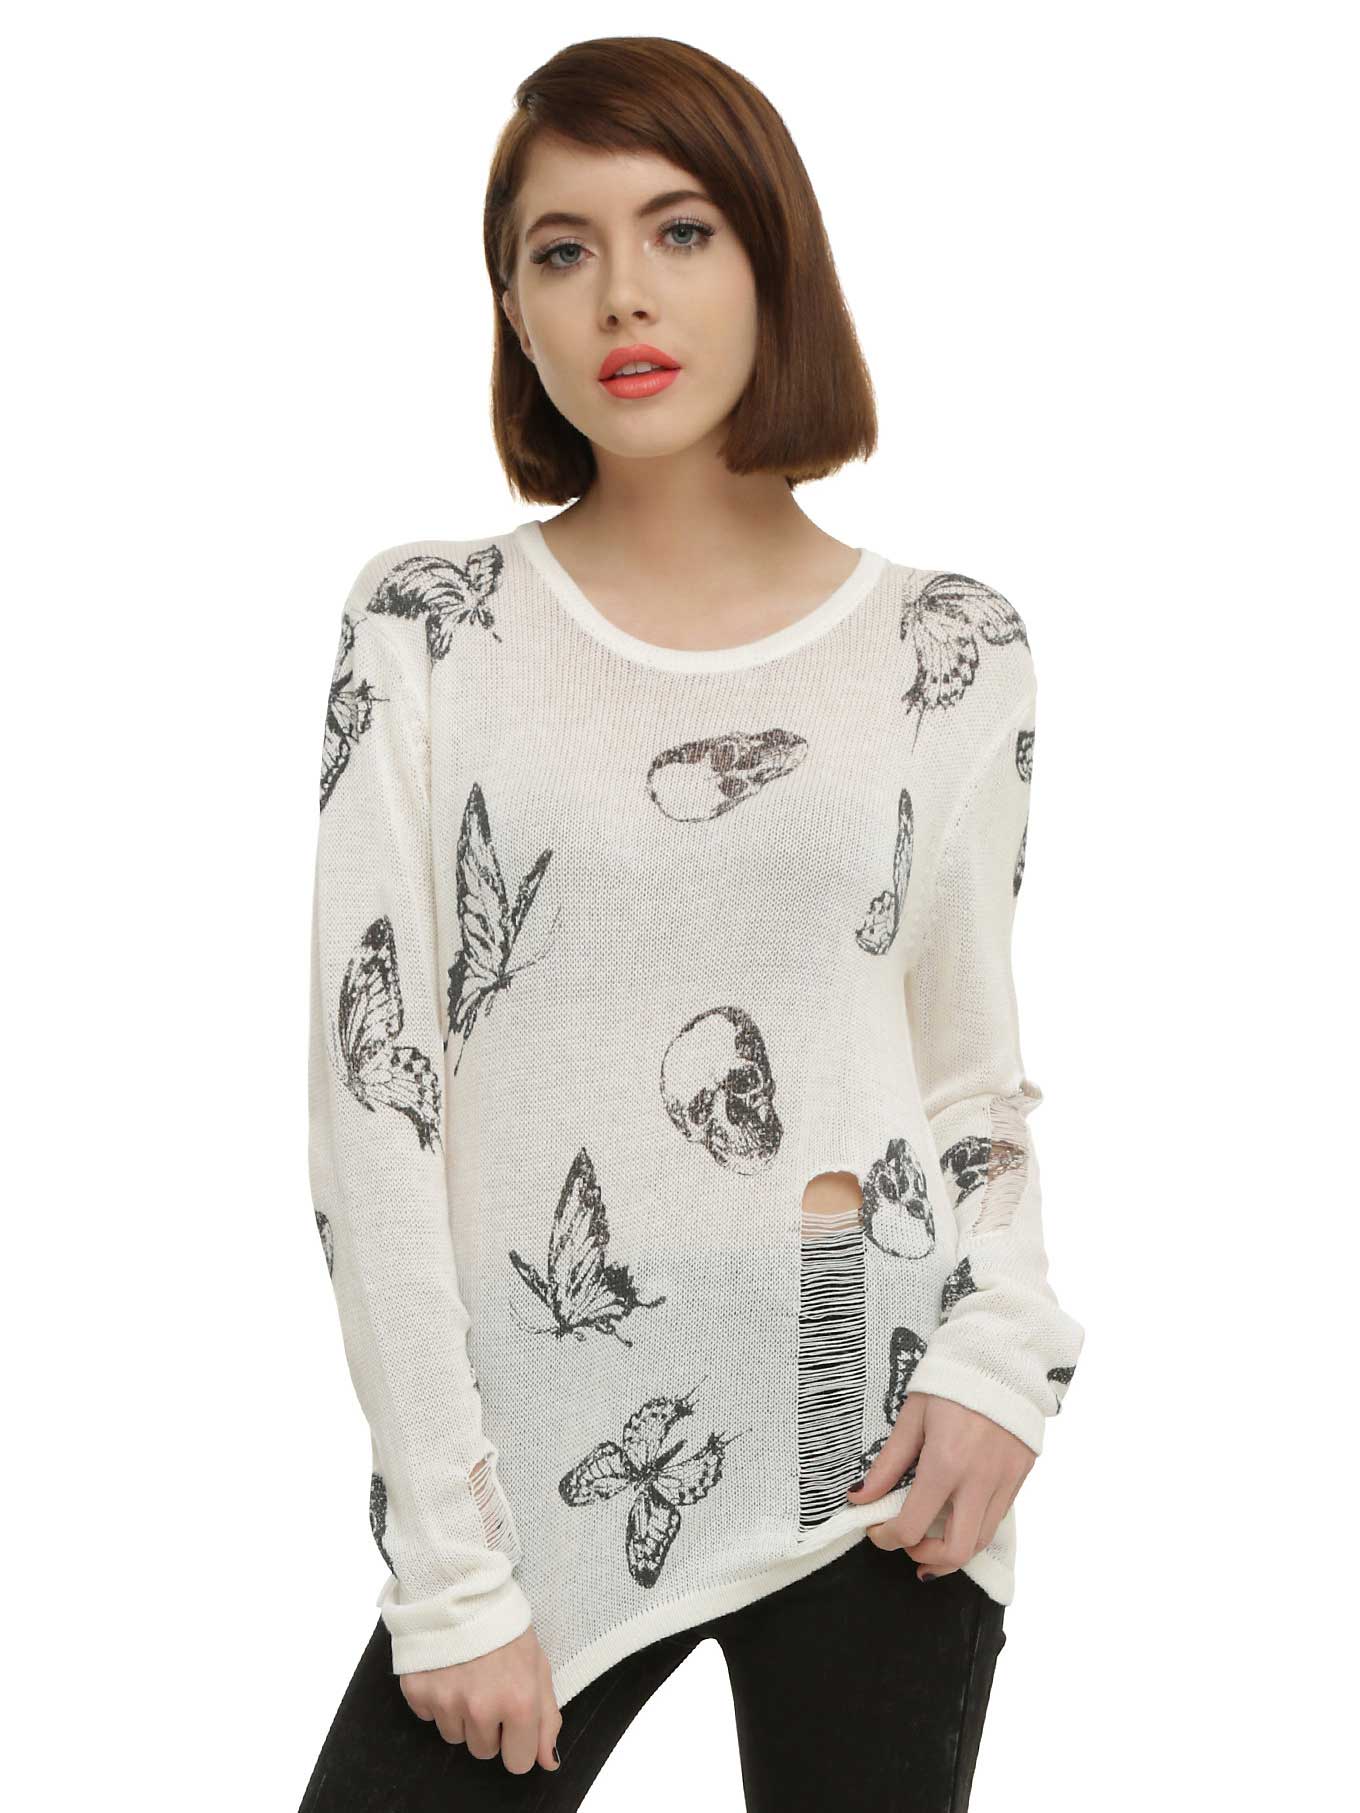 Butterfly and Skulls sweater